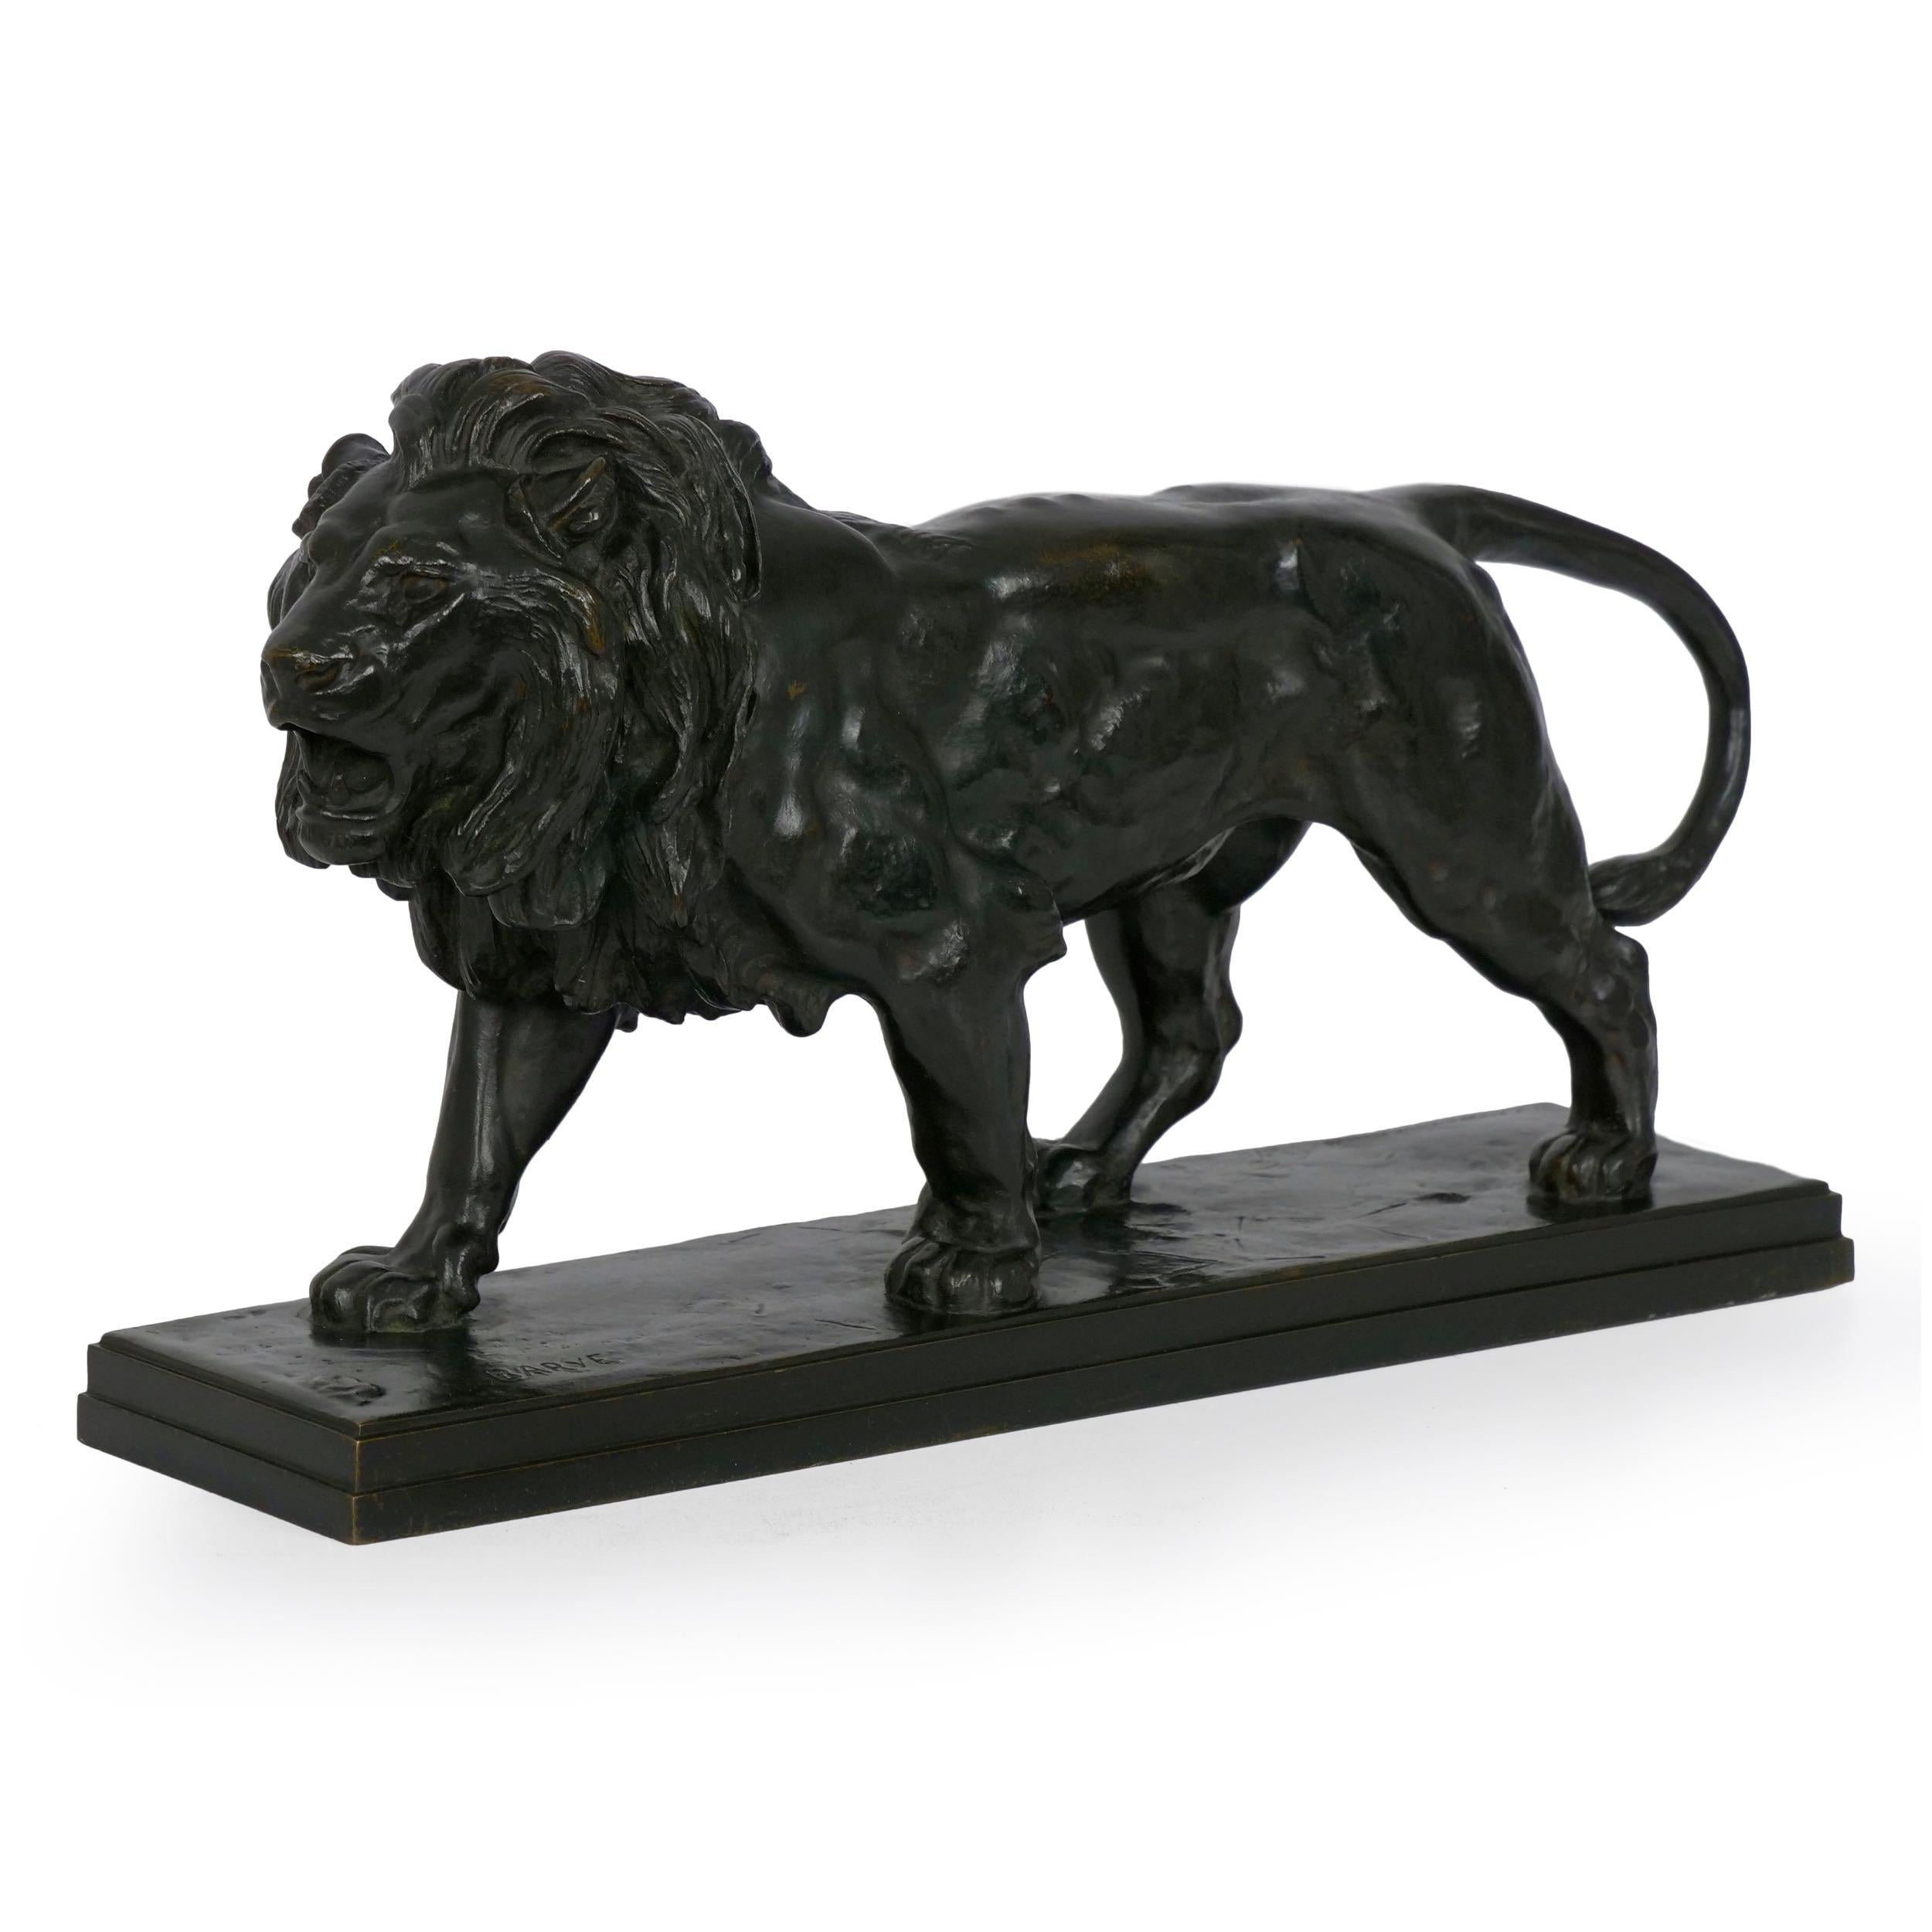 Originally conceived in 1840, the Lion Qui Marche was modeled by Barye as a development from his almost identical bas-relief plaques of Roaring Lion and Lion of the Zodiac. Influence for the model is perhaps somewhat owed to Visconti's 